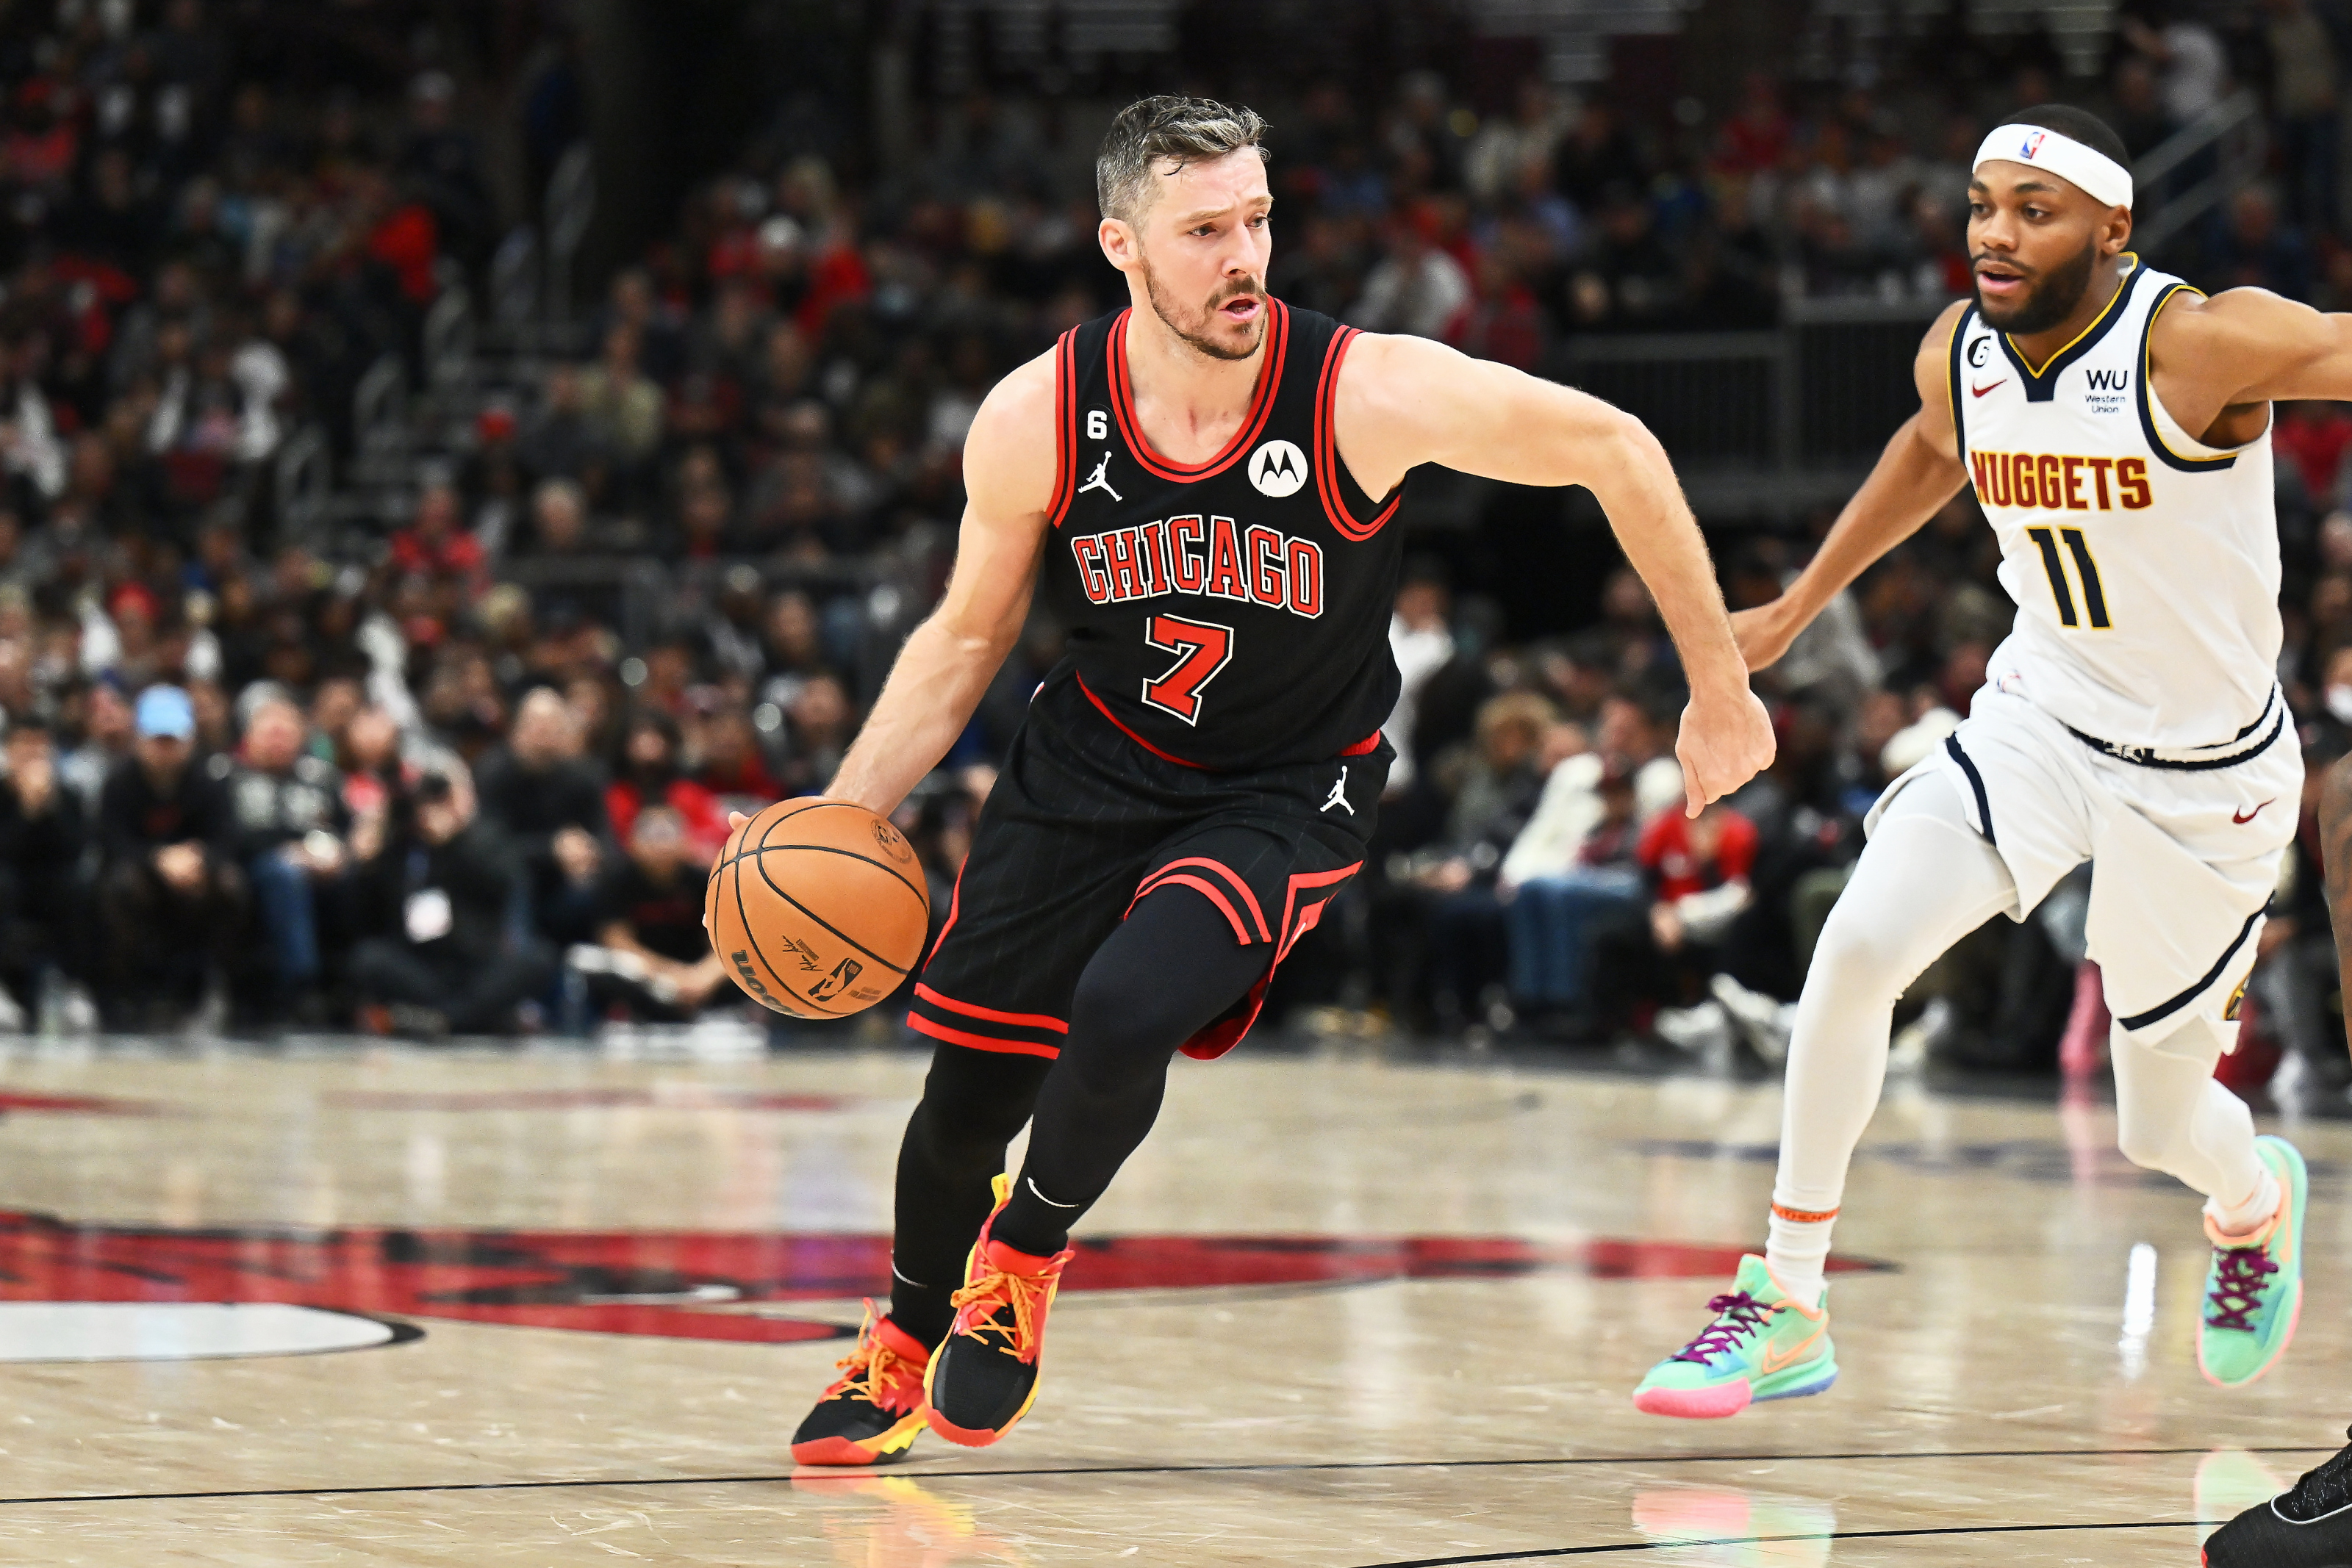 NBA Rumors: Could Goran Dragic's days be numbered on the Bulls?